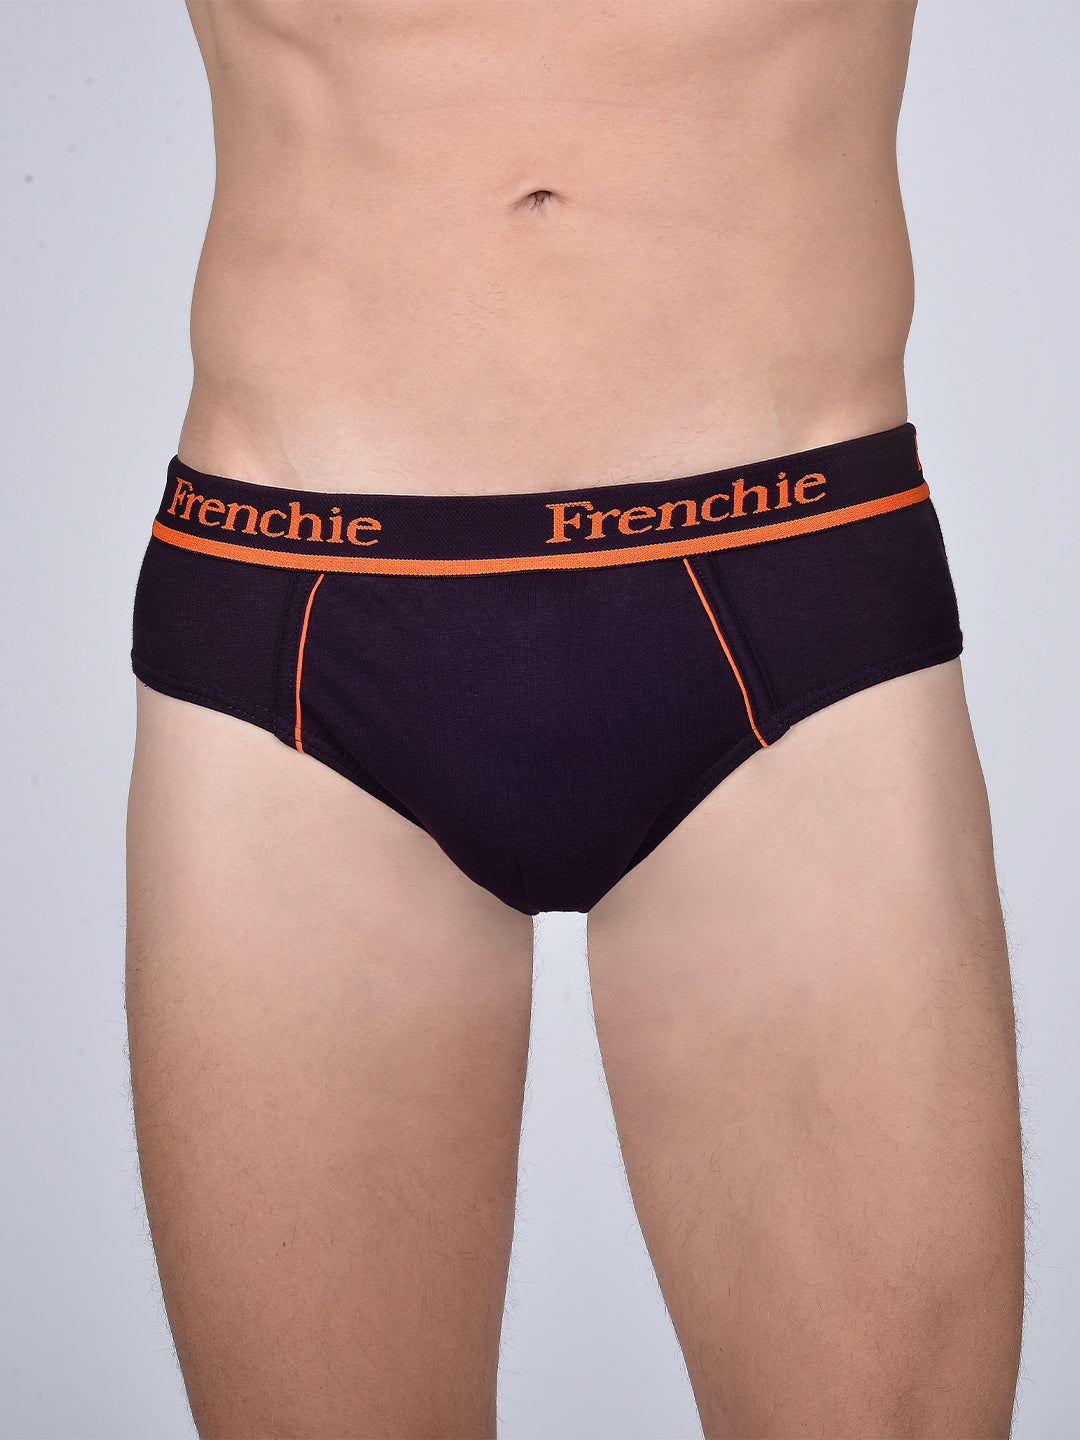 Frenchie Pro PO2 Brief (2 Pc Pack) (Assorted Colour)